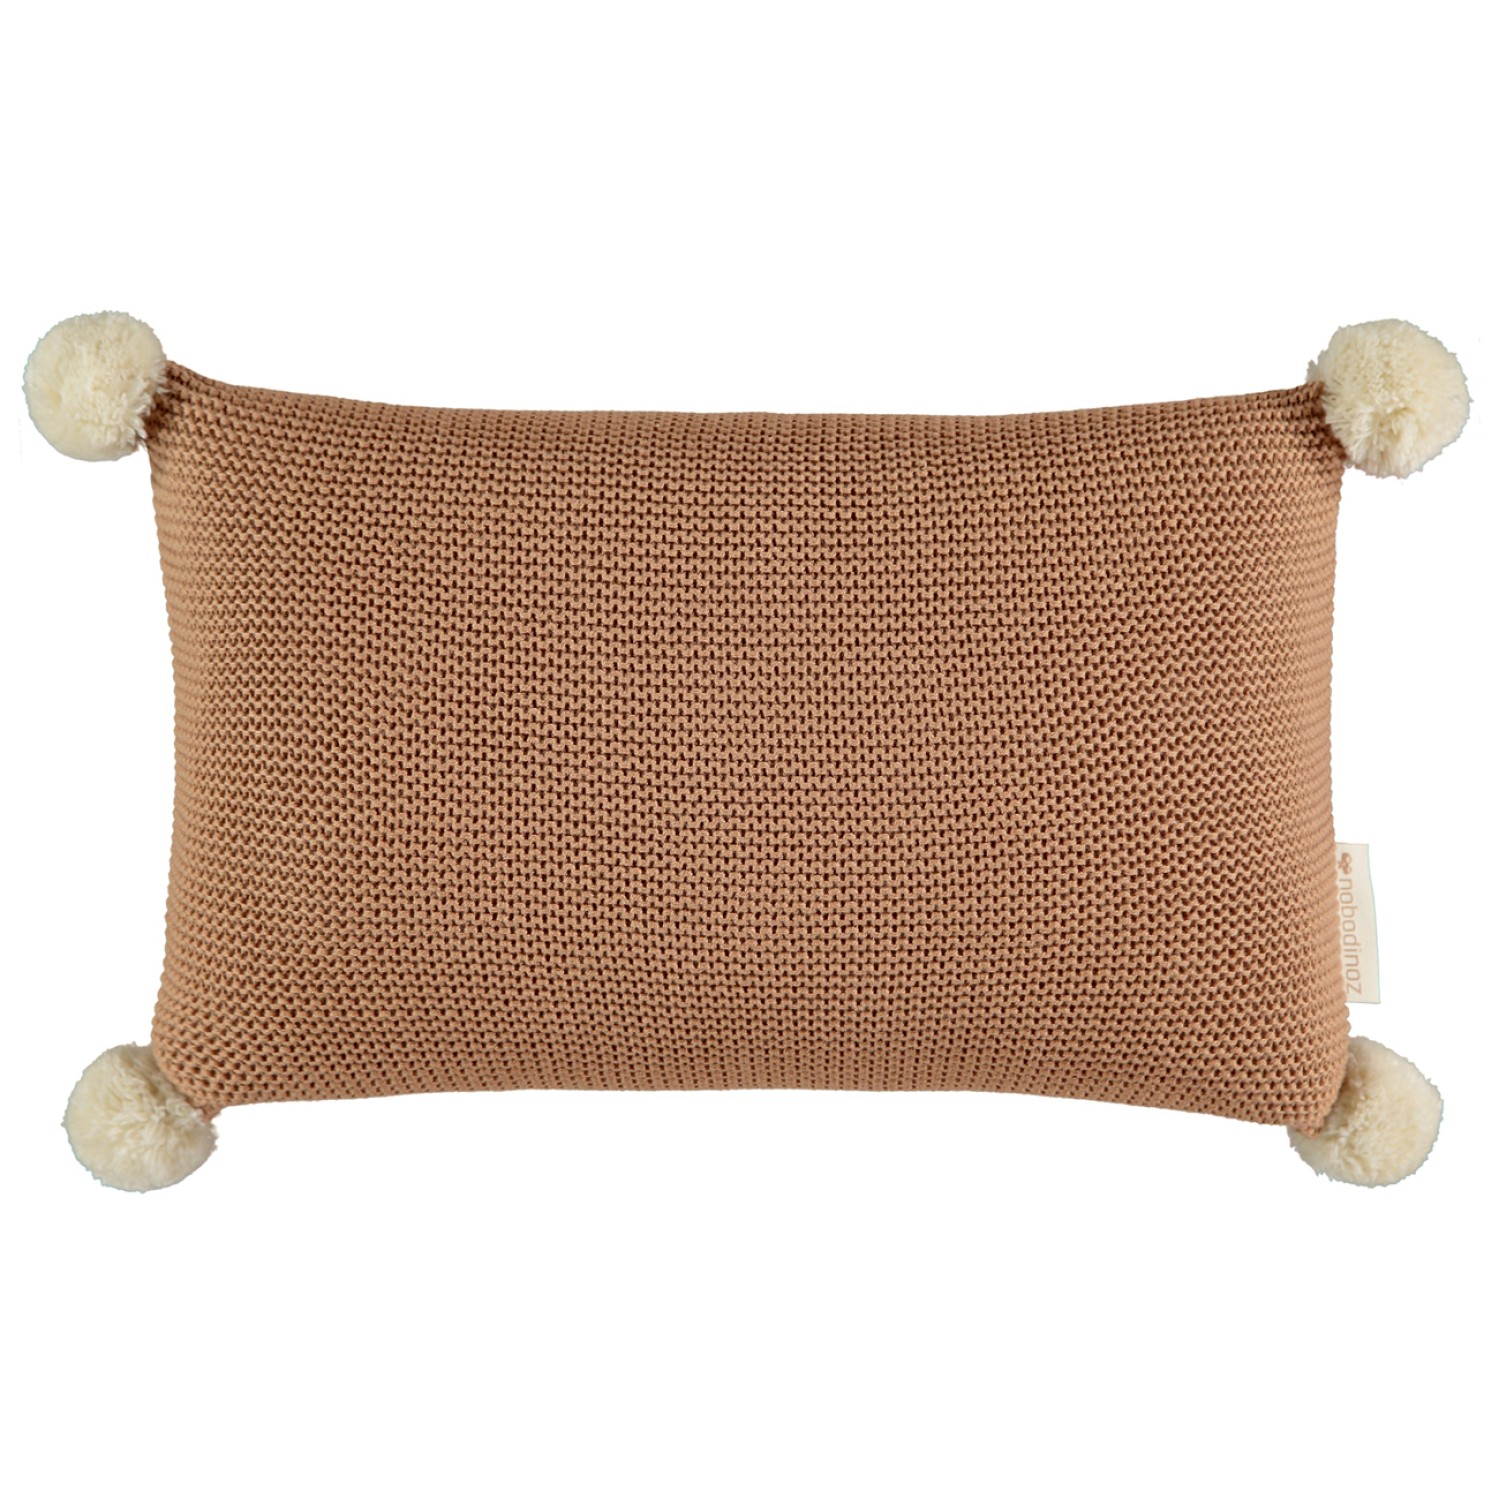 So Natural knitted cushion • Biscuit